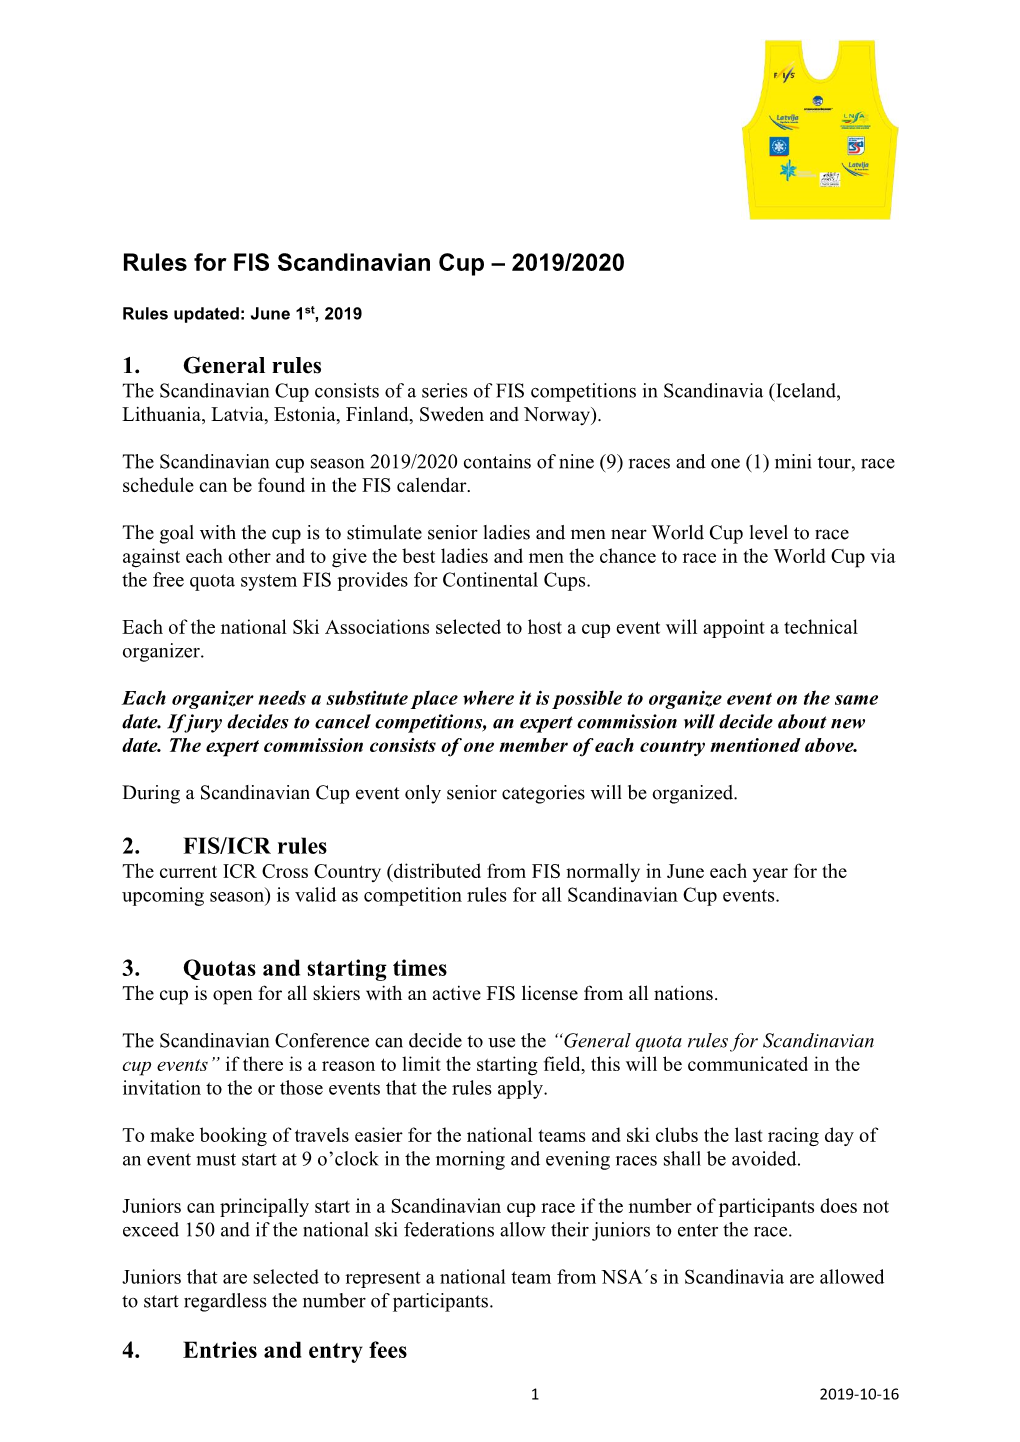 Rules for FIS Continental Cups